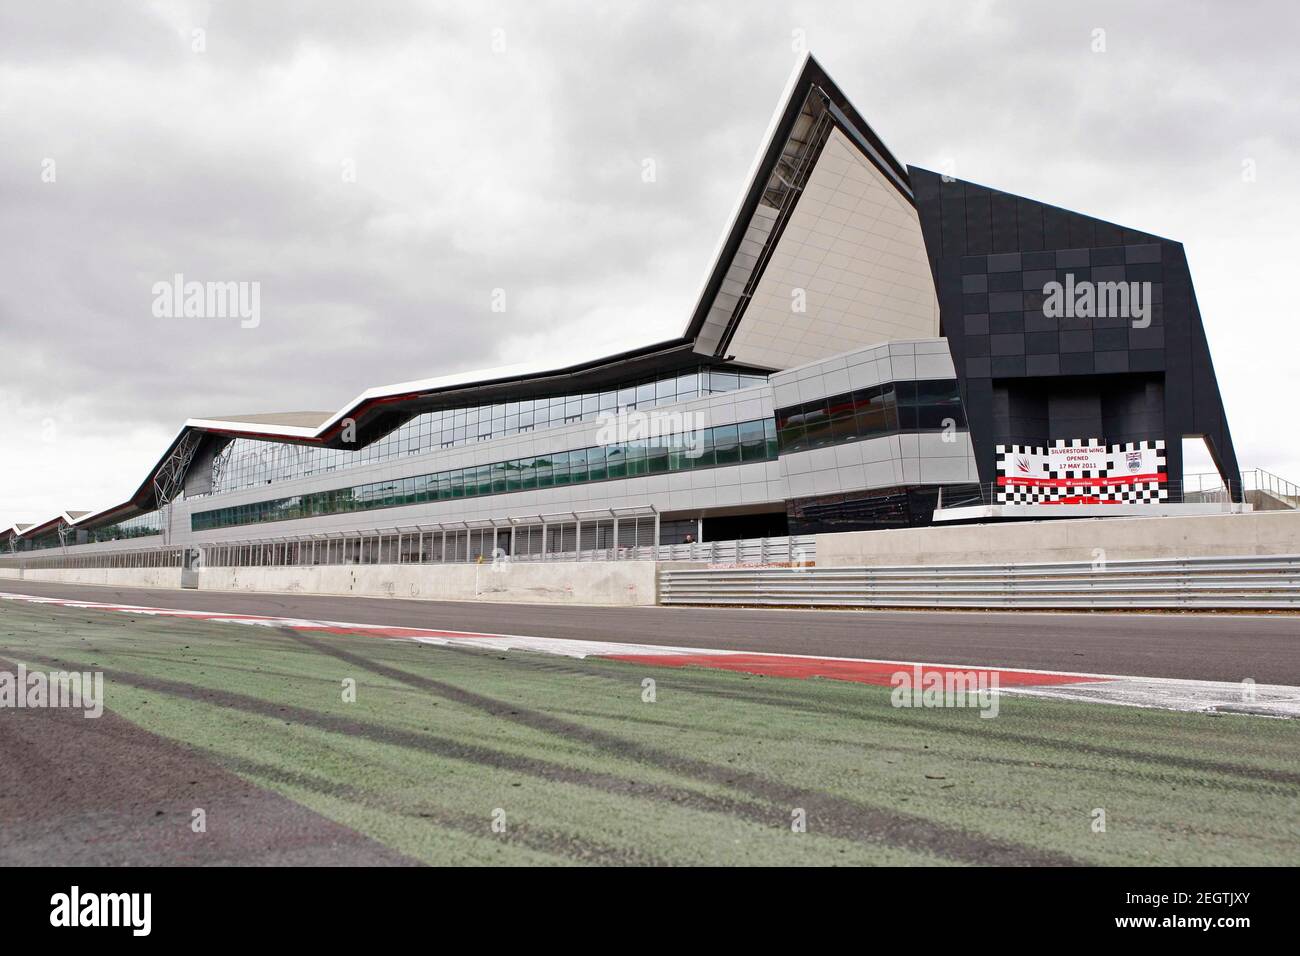 Formula One - F1 - Official launch of The Silverstone Wing  - The Silverstone Wing, Silverstone Circuit, Northamptonshire, NN12 8TN  - 17/5/11  General view of the Silverstone Wing  Mandatory Credit: Action Images / Peter Cziborra  Livepic Stock Photo